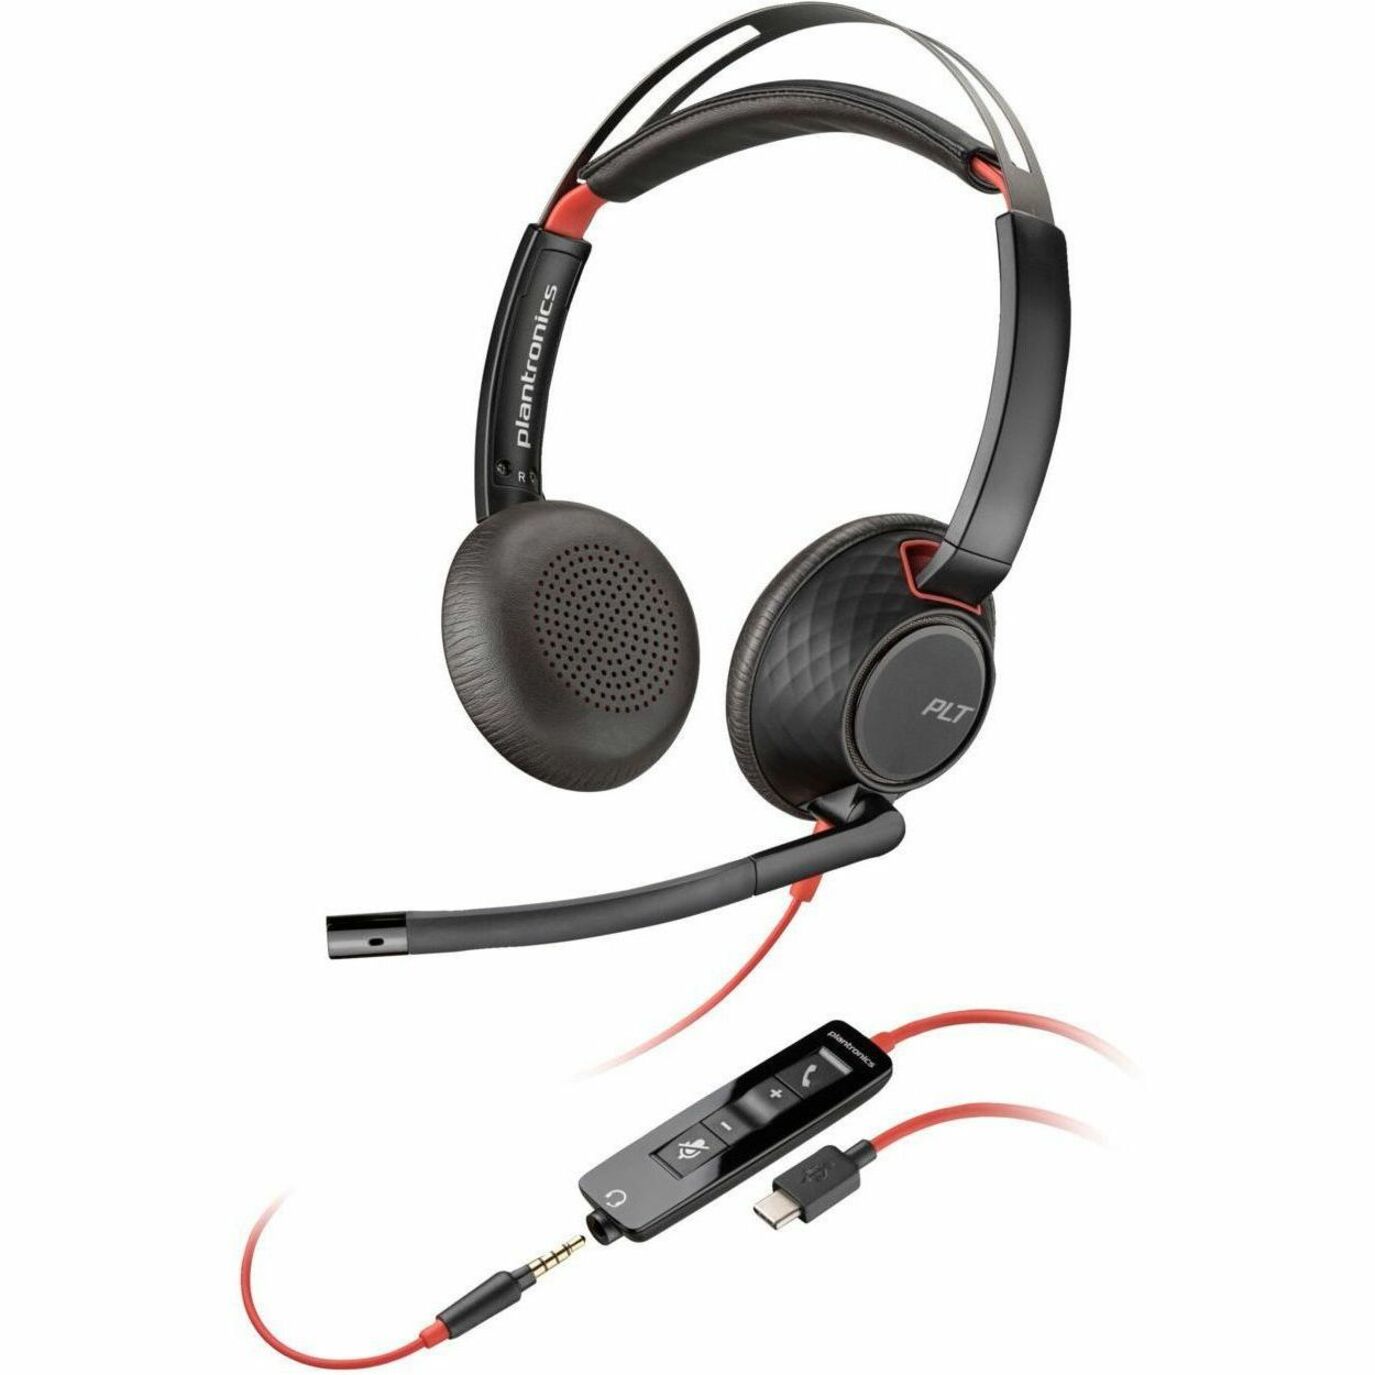 Poly Blackwire C5220 Headset, Binaural Over-the-head, Noise Cancelling, 2 Year Warranty